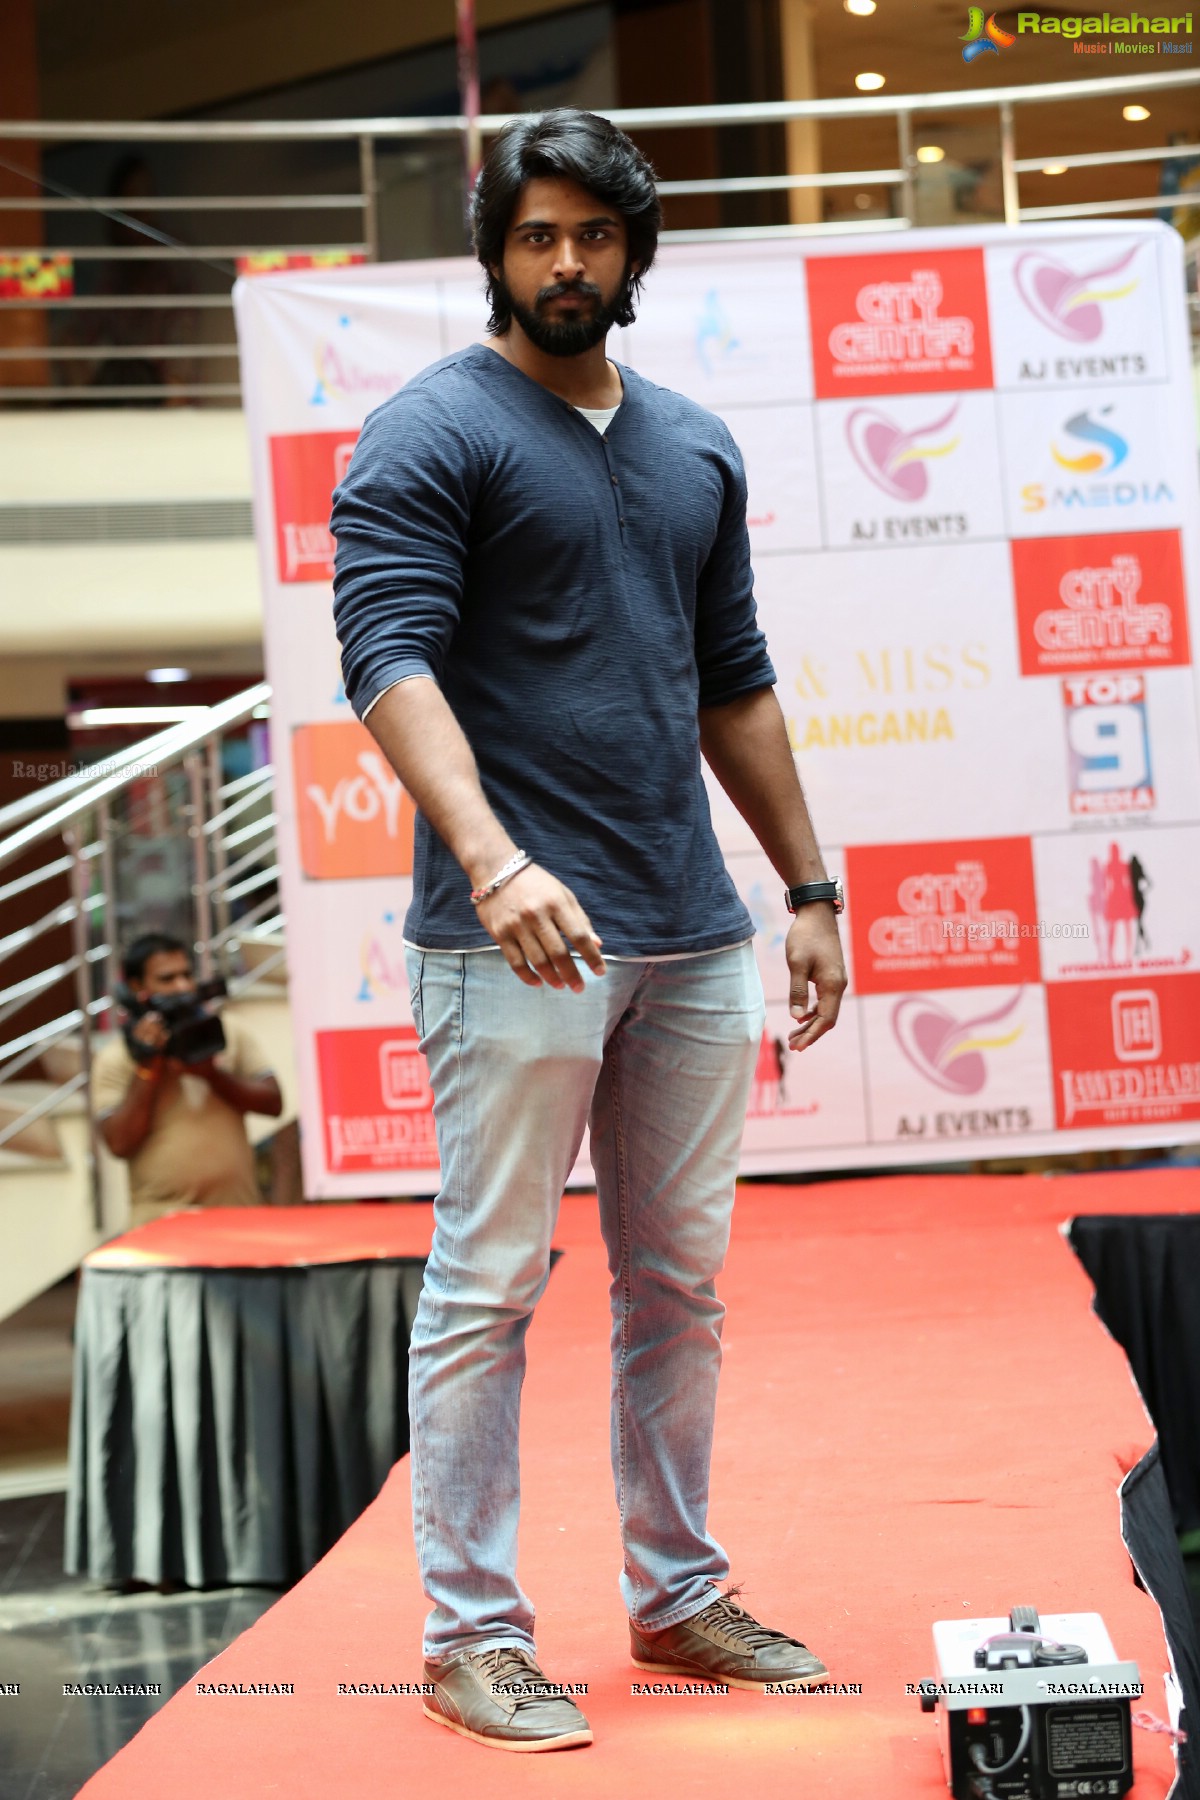 Mr and Miss Telangana Auditions 2018 Finals at City Center Mall, Hyderabad